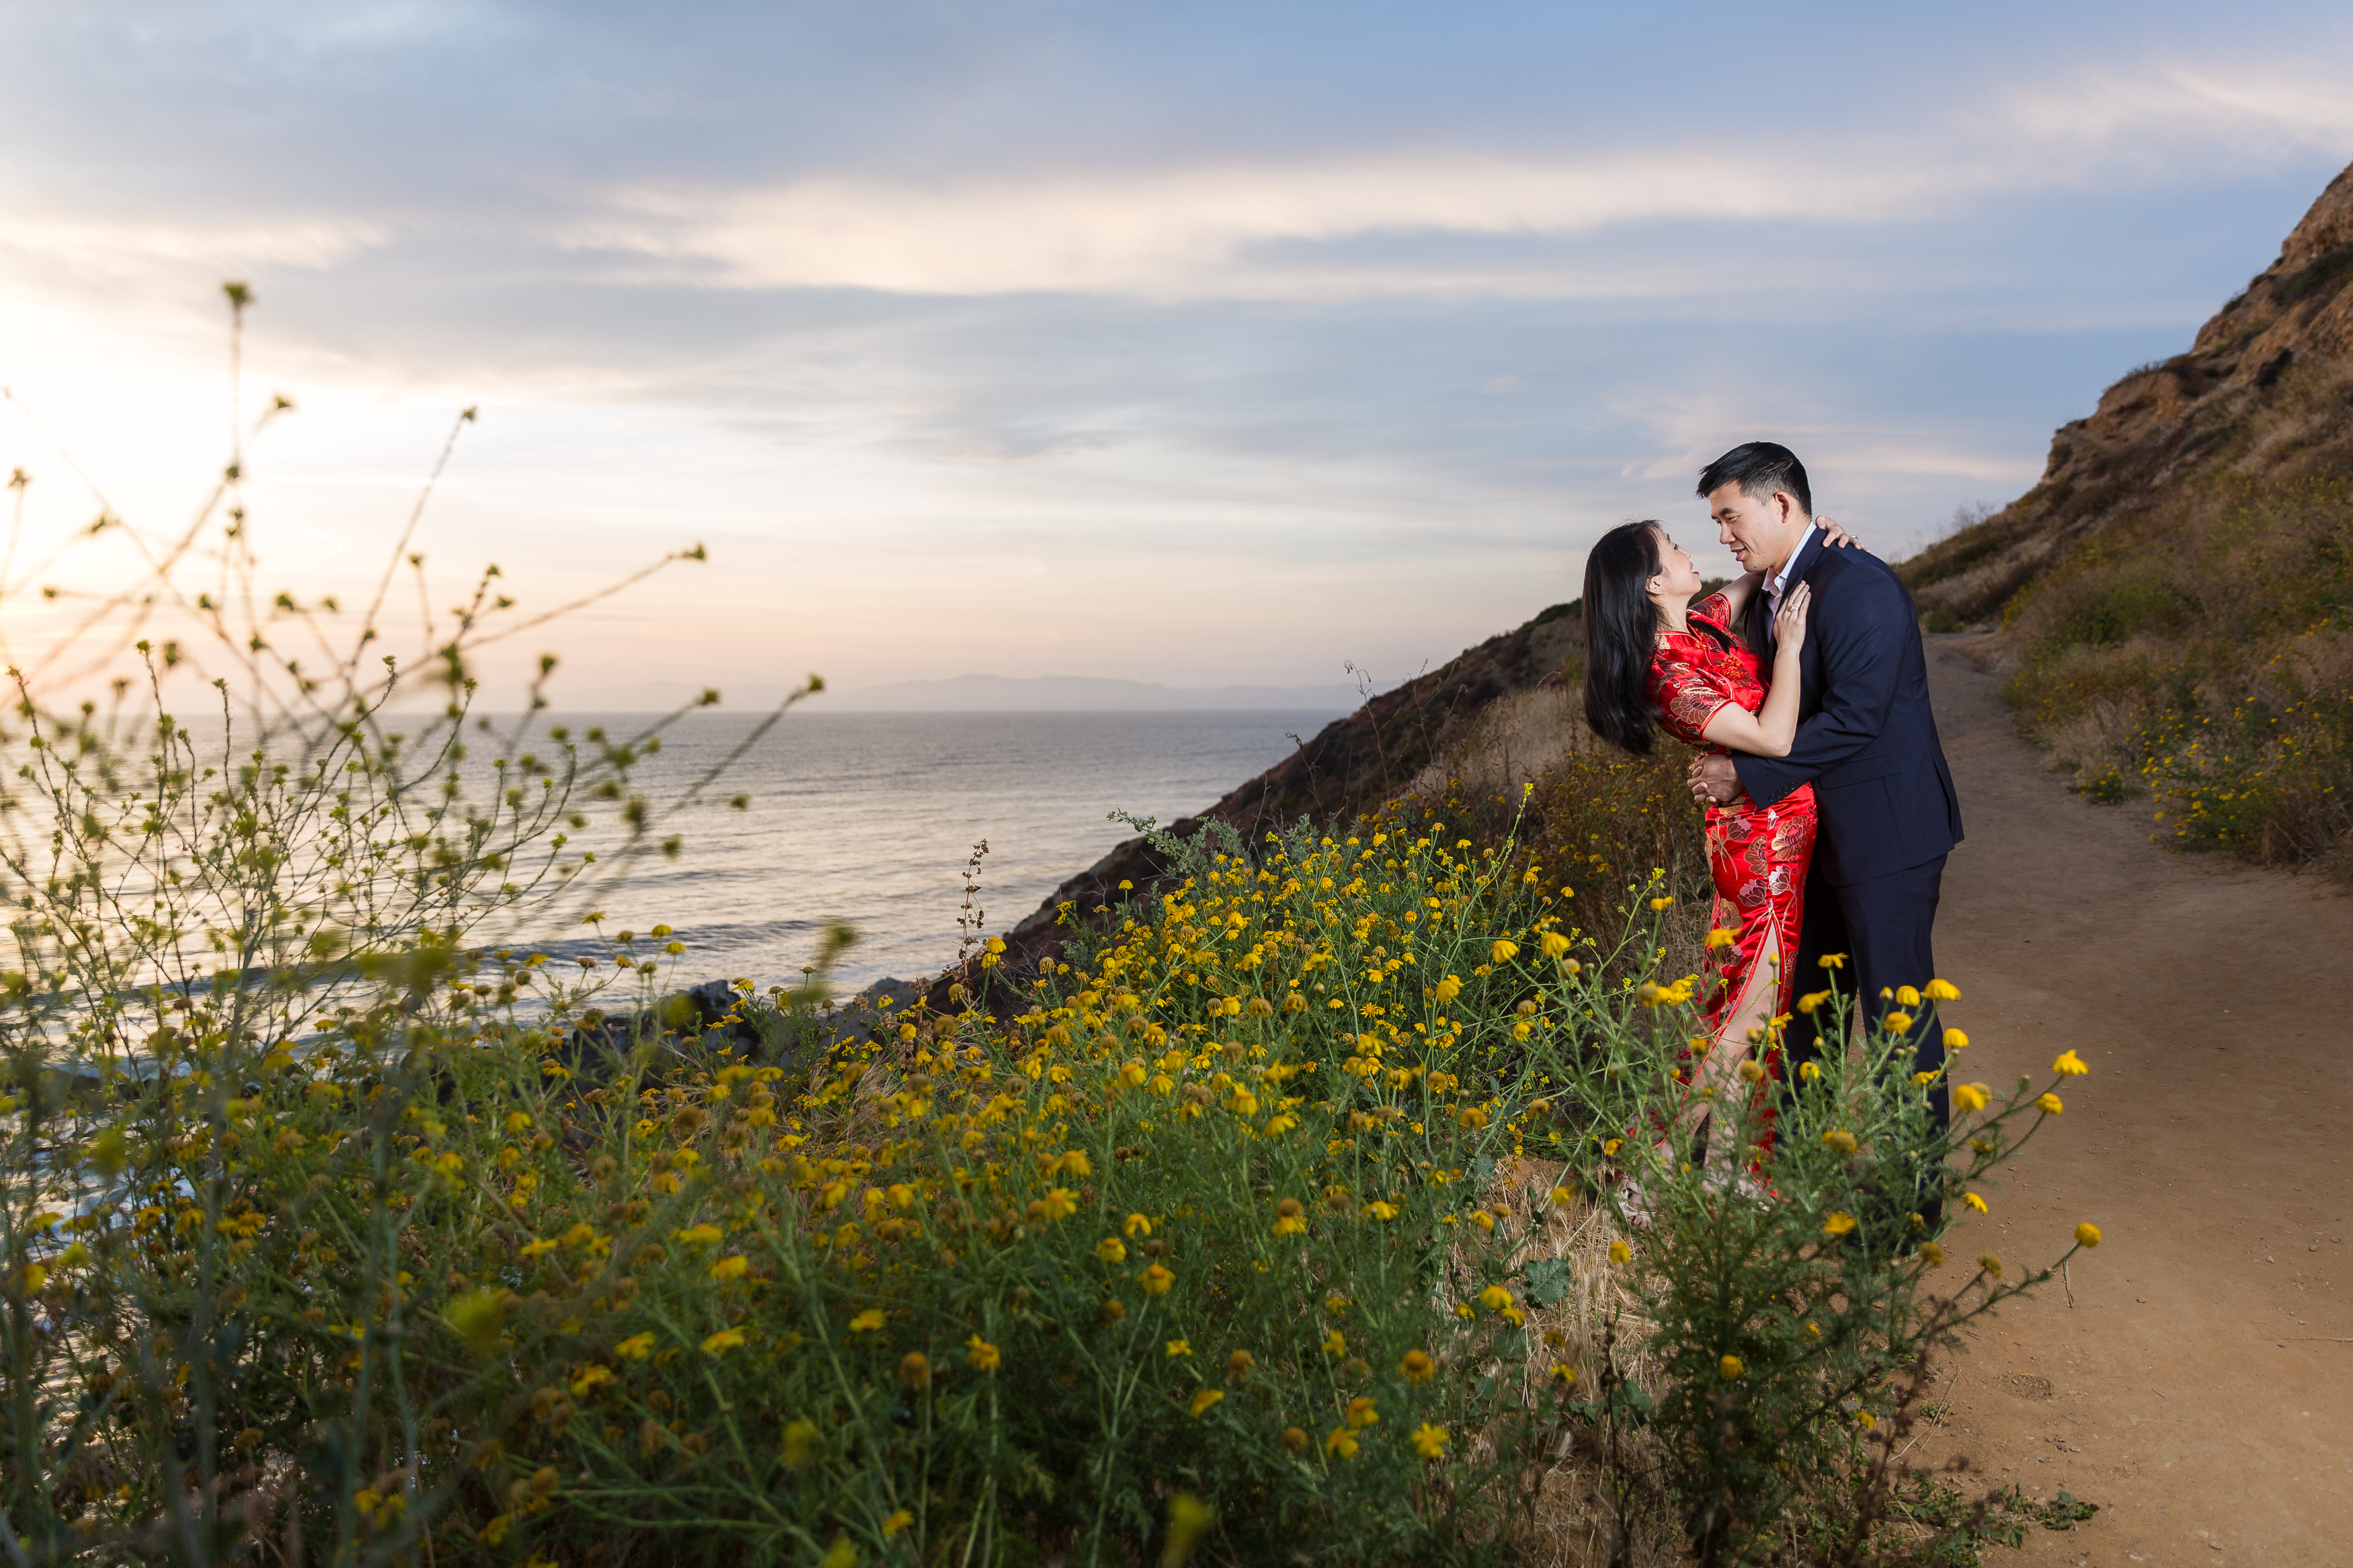 Man dipping woman back behind yellow flowers along cliffside during sunset